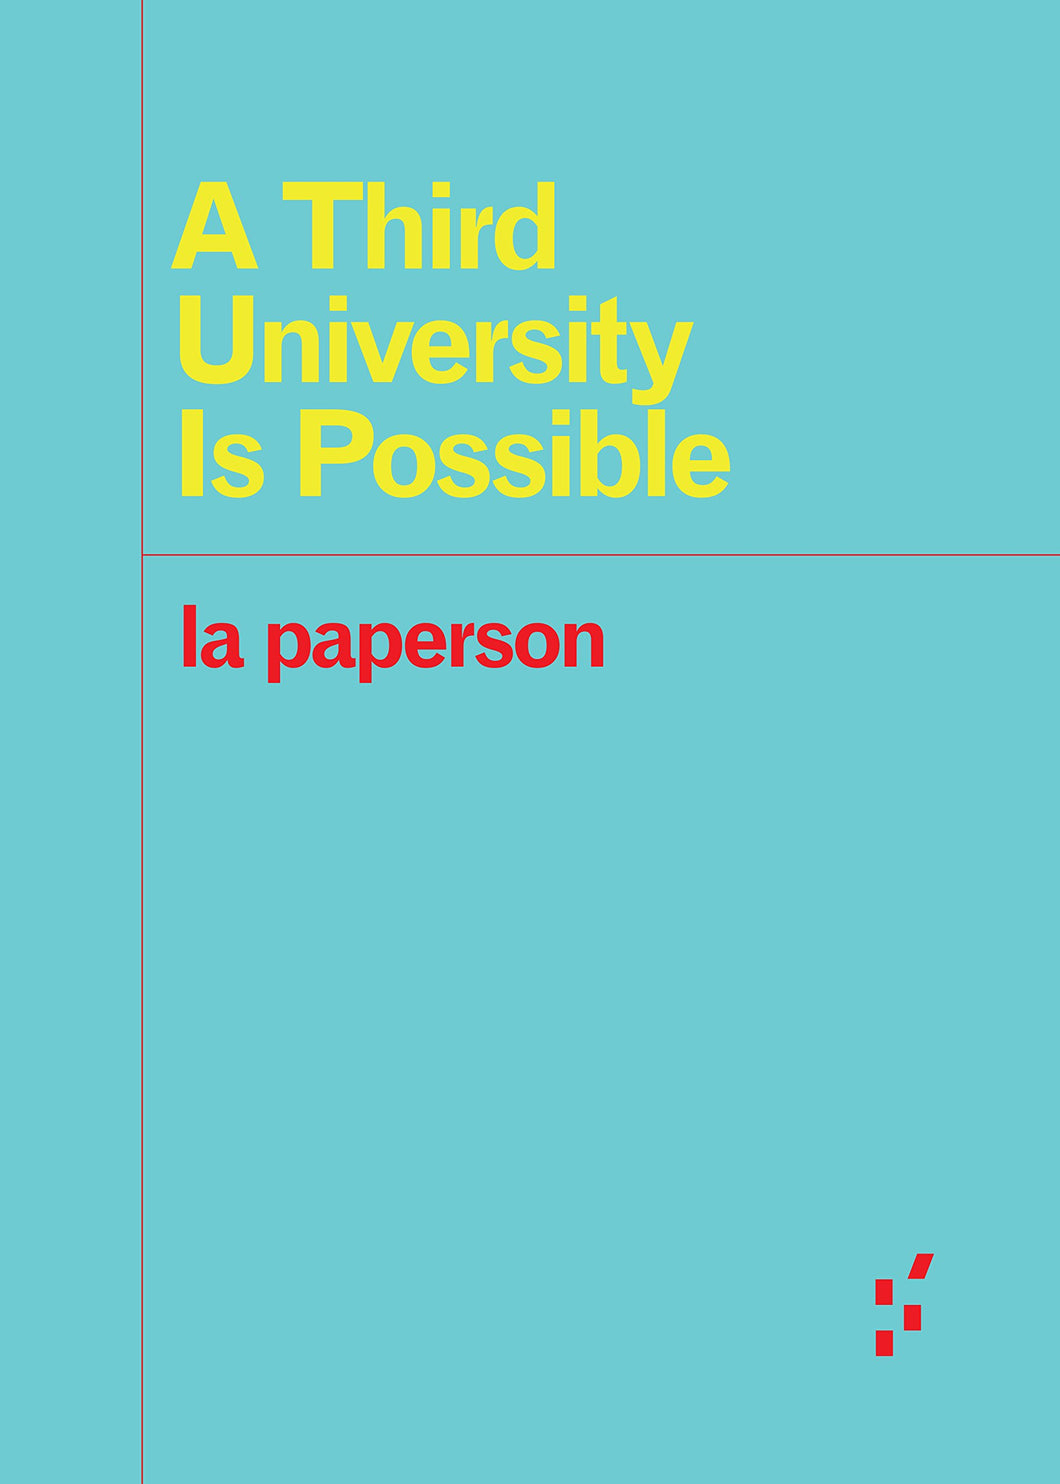 A Third University Is Possible by la paperson